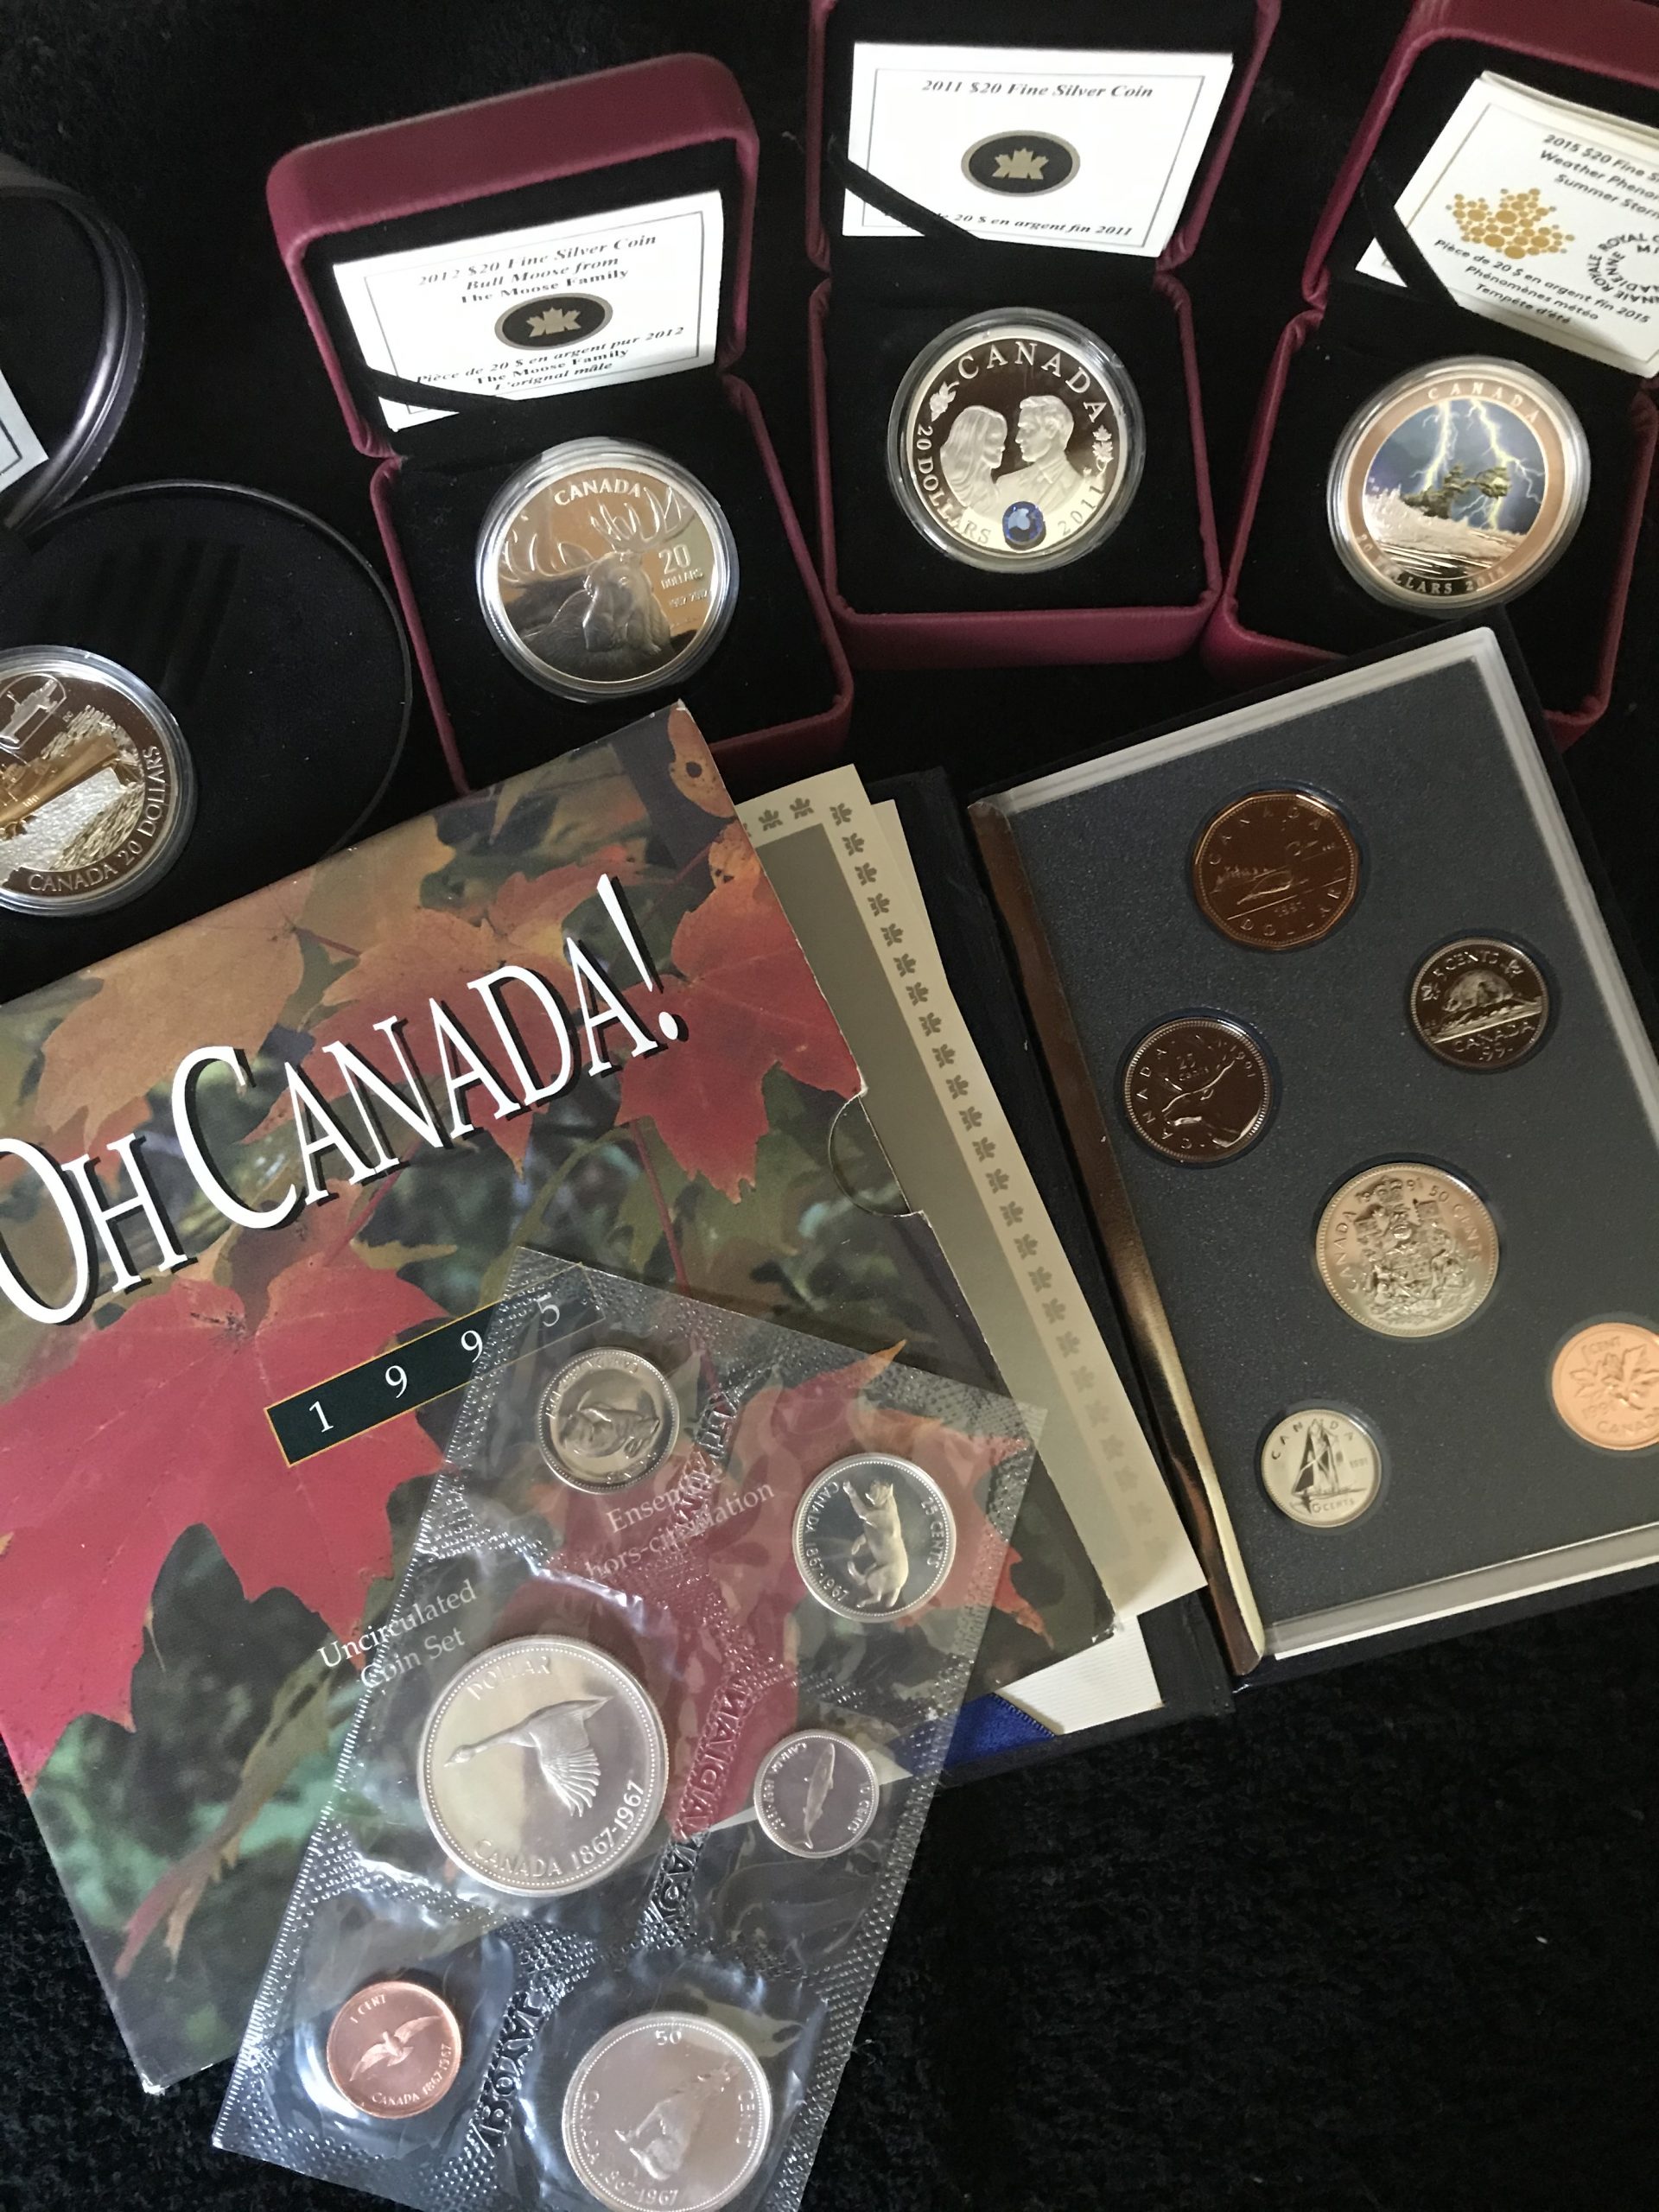 Royal Canadian Mint products